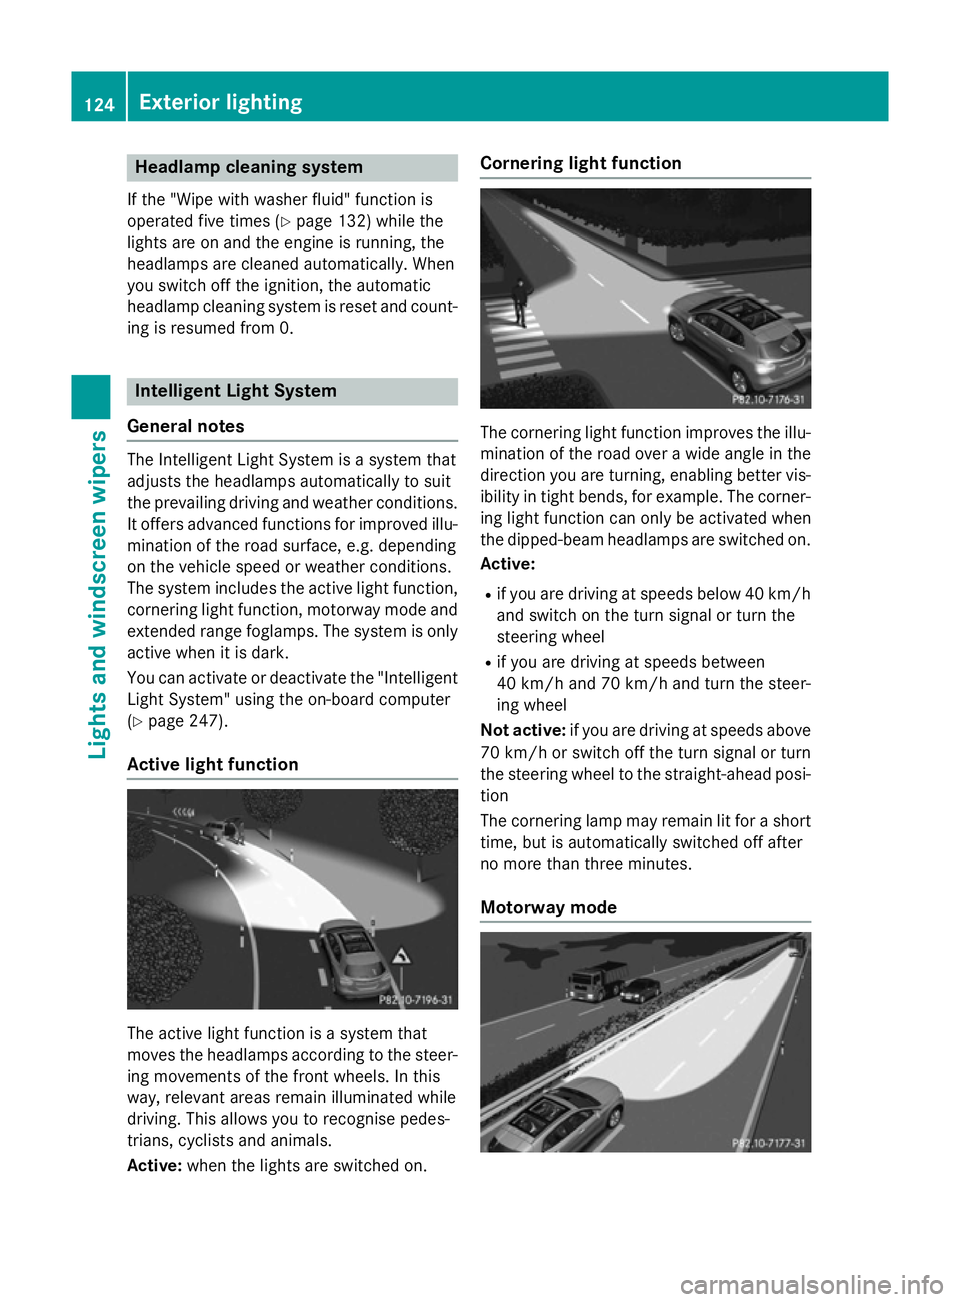 MERCEDES-BENZ GLA SUV 2013  Owners Manual Headlamp cleaning system
If the "Wipe with washer fluid" function is
operated five times (Y page 132) while the
lights are on and the engine is running, the
headlamps are cleaned automatically